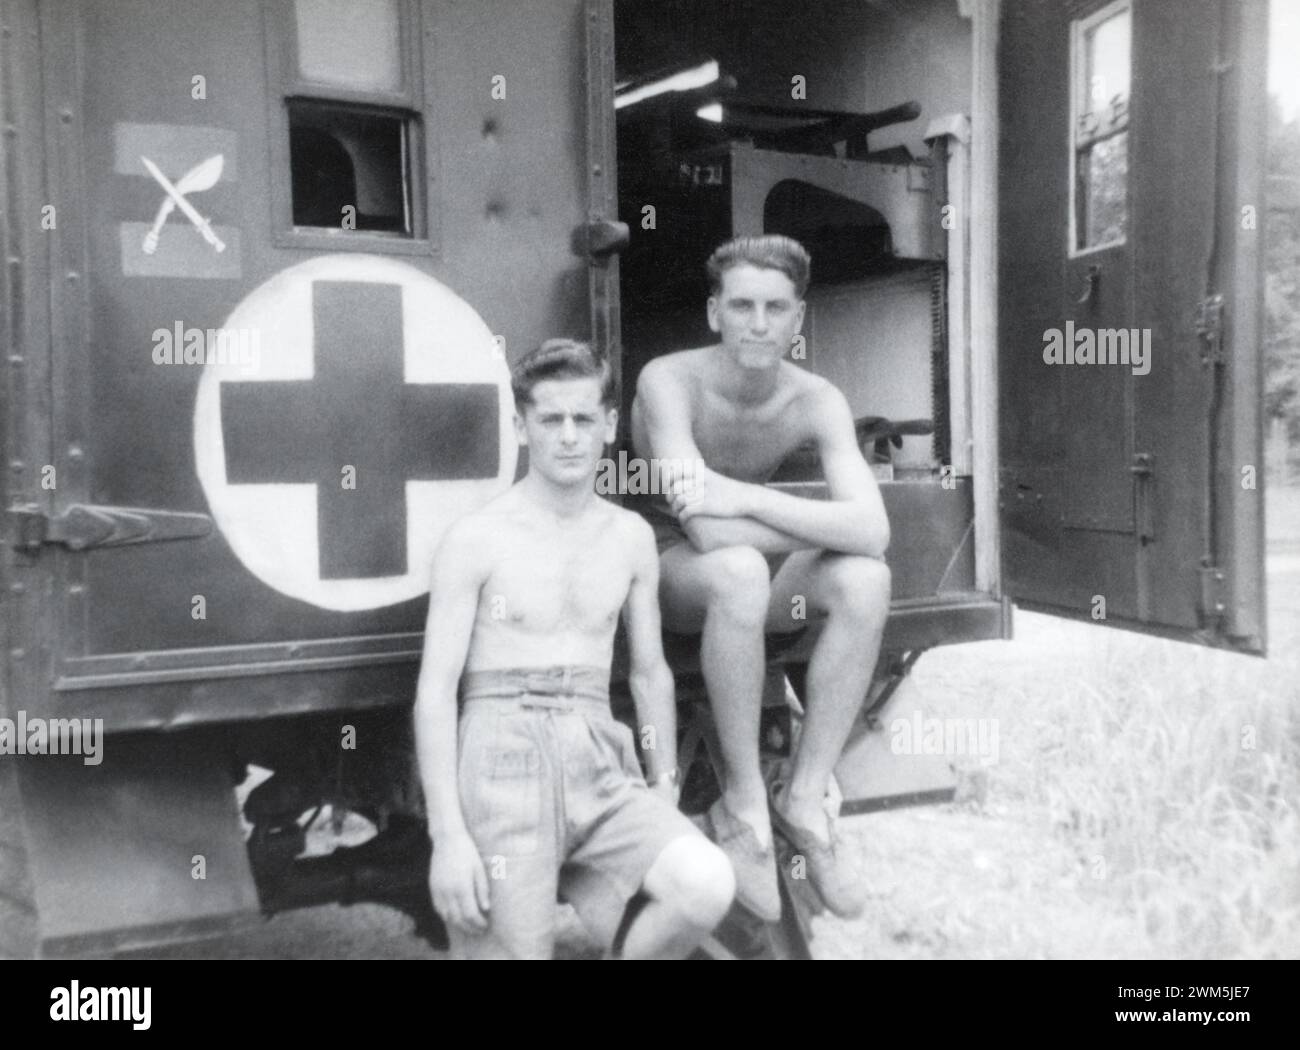 British soldiers of the Royal Army Medical Corps with their ambulance during the Malayan Emergancy, 1950. Stock Photo